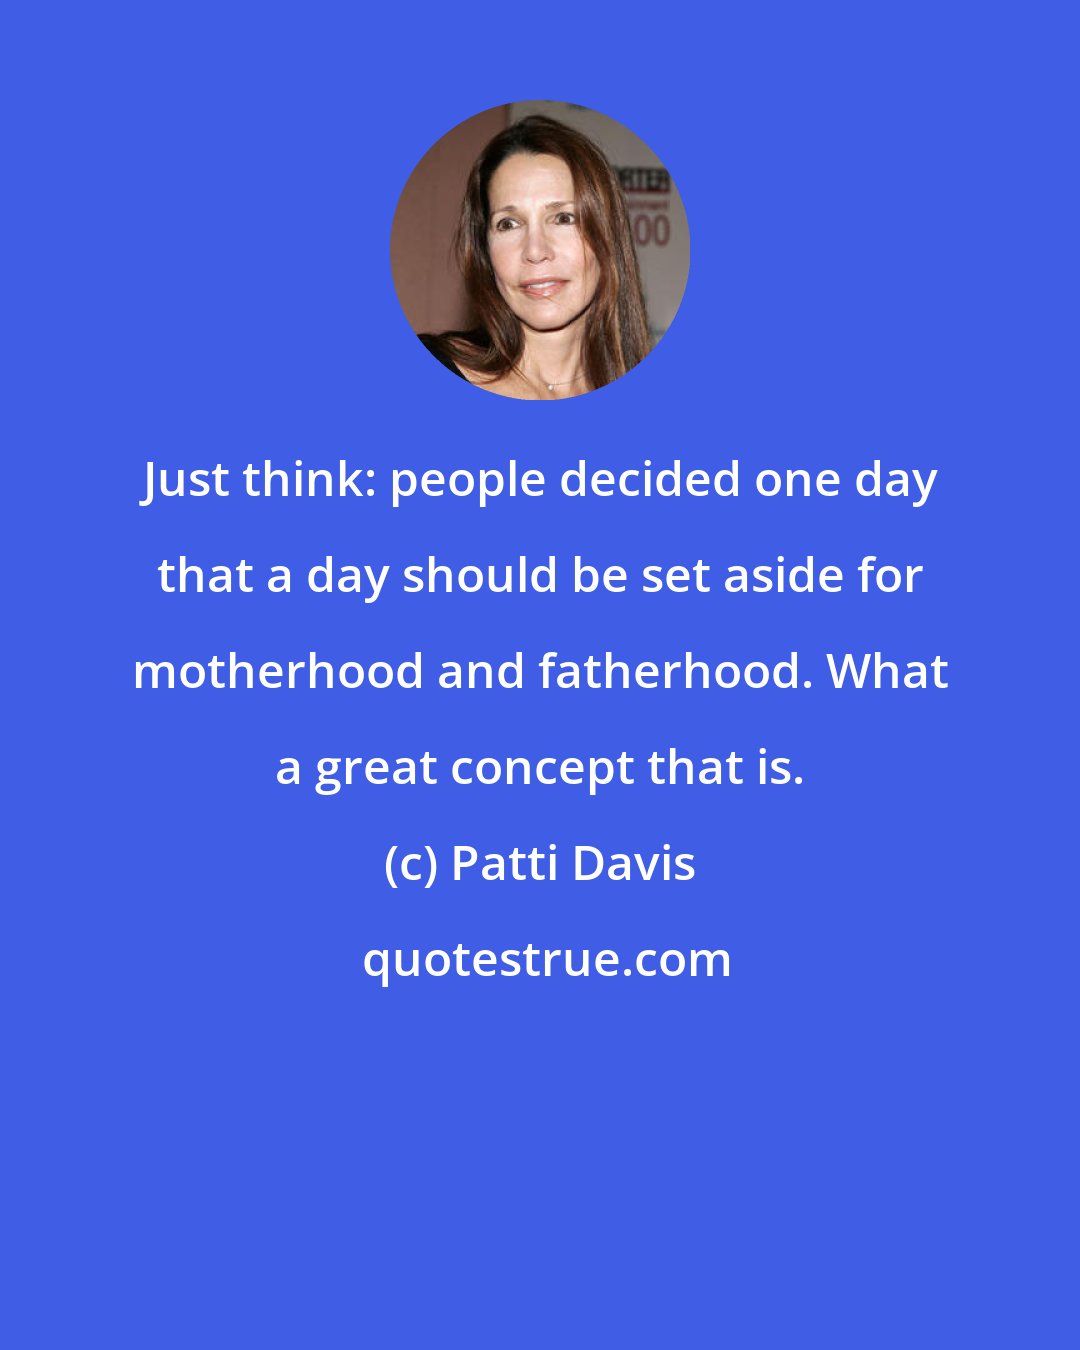 Patti Davis: Just think: people decided one day that a day should be set aside for motherhood and fatherhood. What a great concept that is.